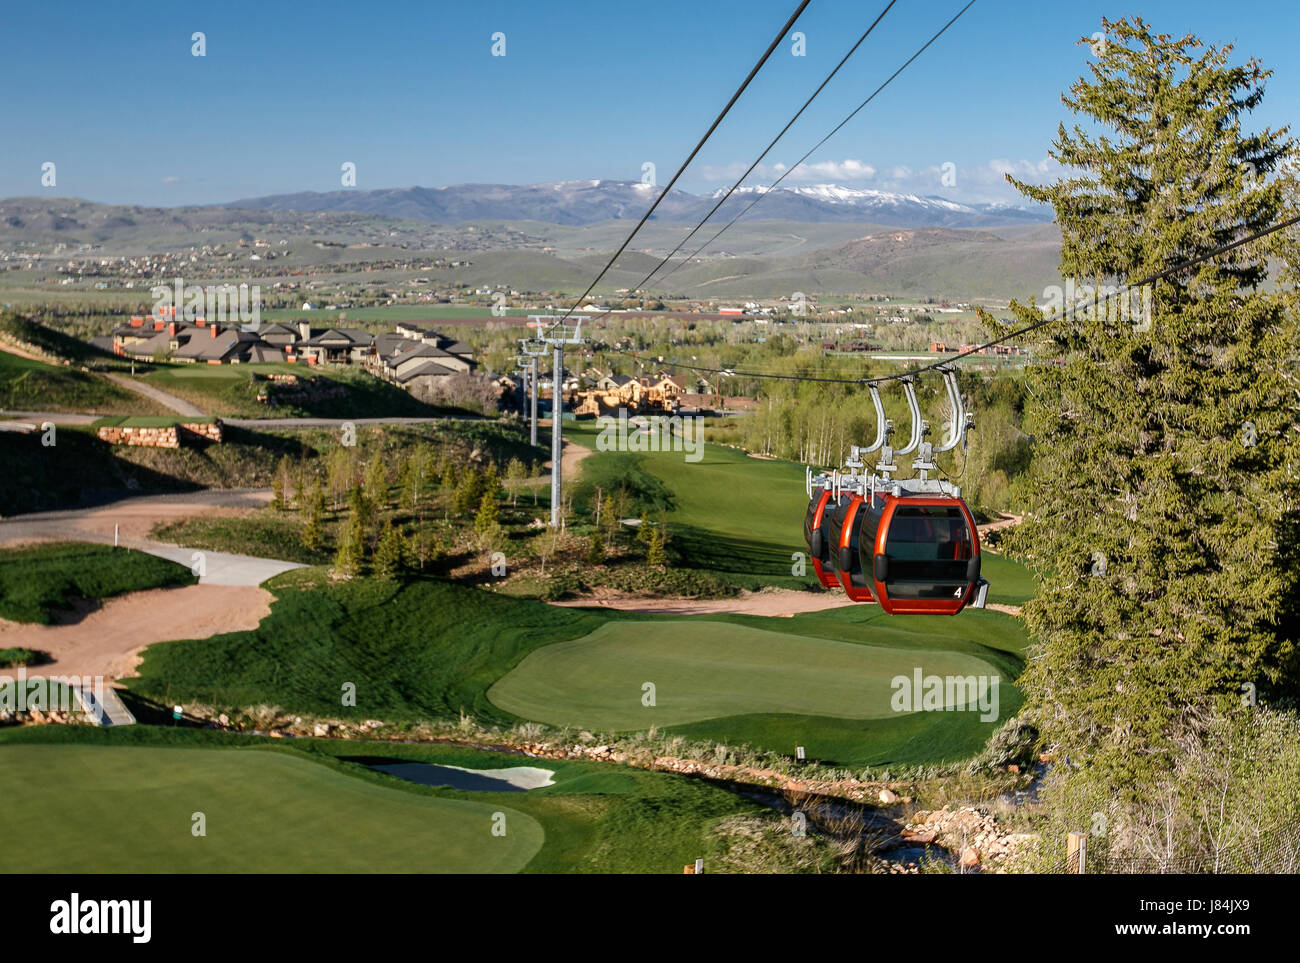 Park City, UT, May 12, 2017: Gondola cables and three cabins suspended by them at Canyons resort. The gondola hotels with the mountain base. Stock Photo